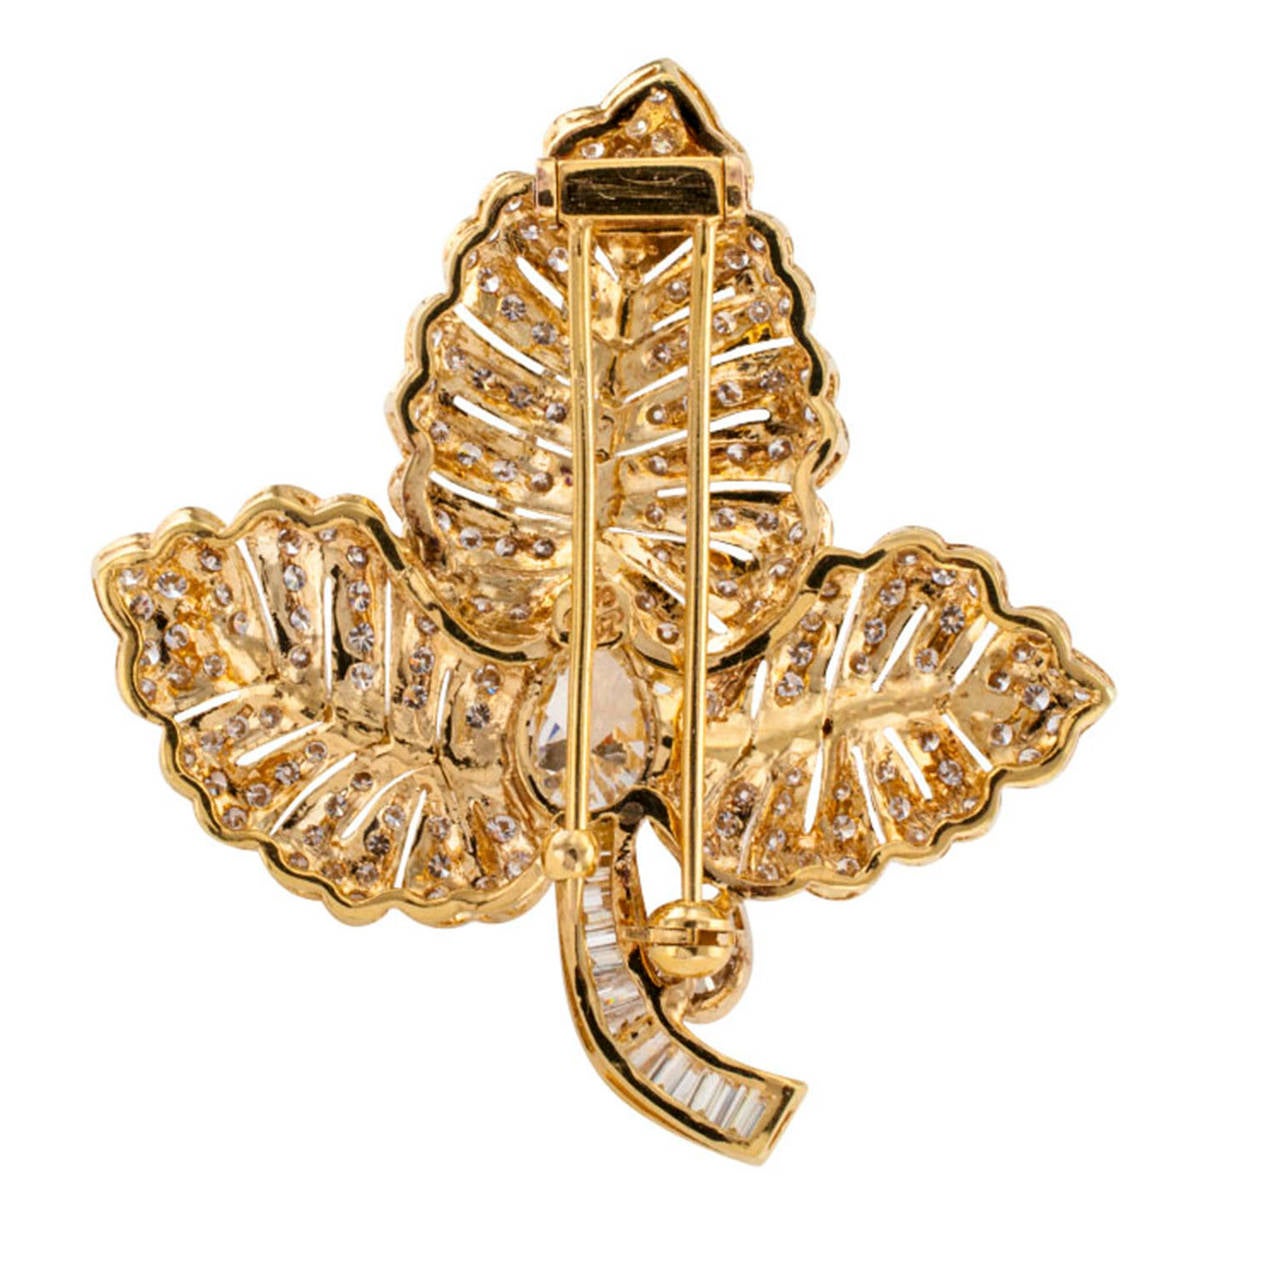 Diamond Intensive Leaf Brooch Circa 1980

This is an eye-catching design depicting a three part leaf that is seemingly covered with a heavy dew of shimmering diamonds  Joined at the center by a large teardrop-shaped diamond, rising from a stem